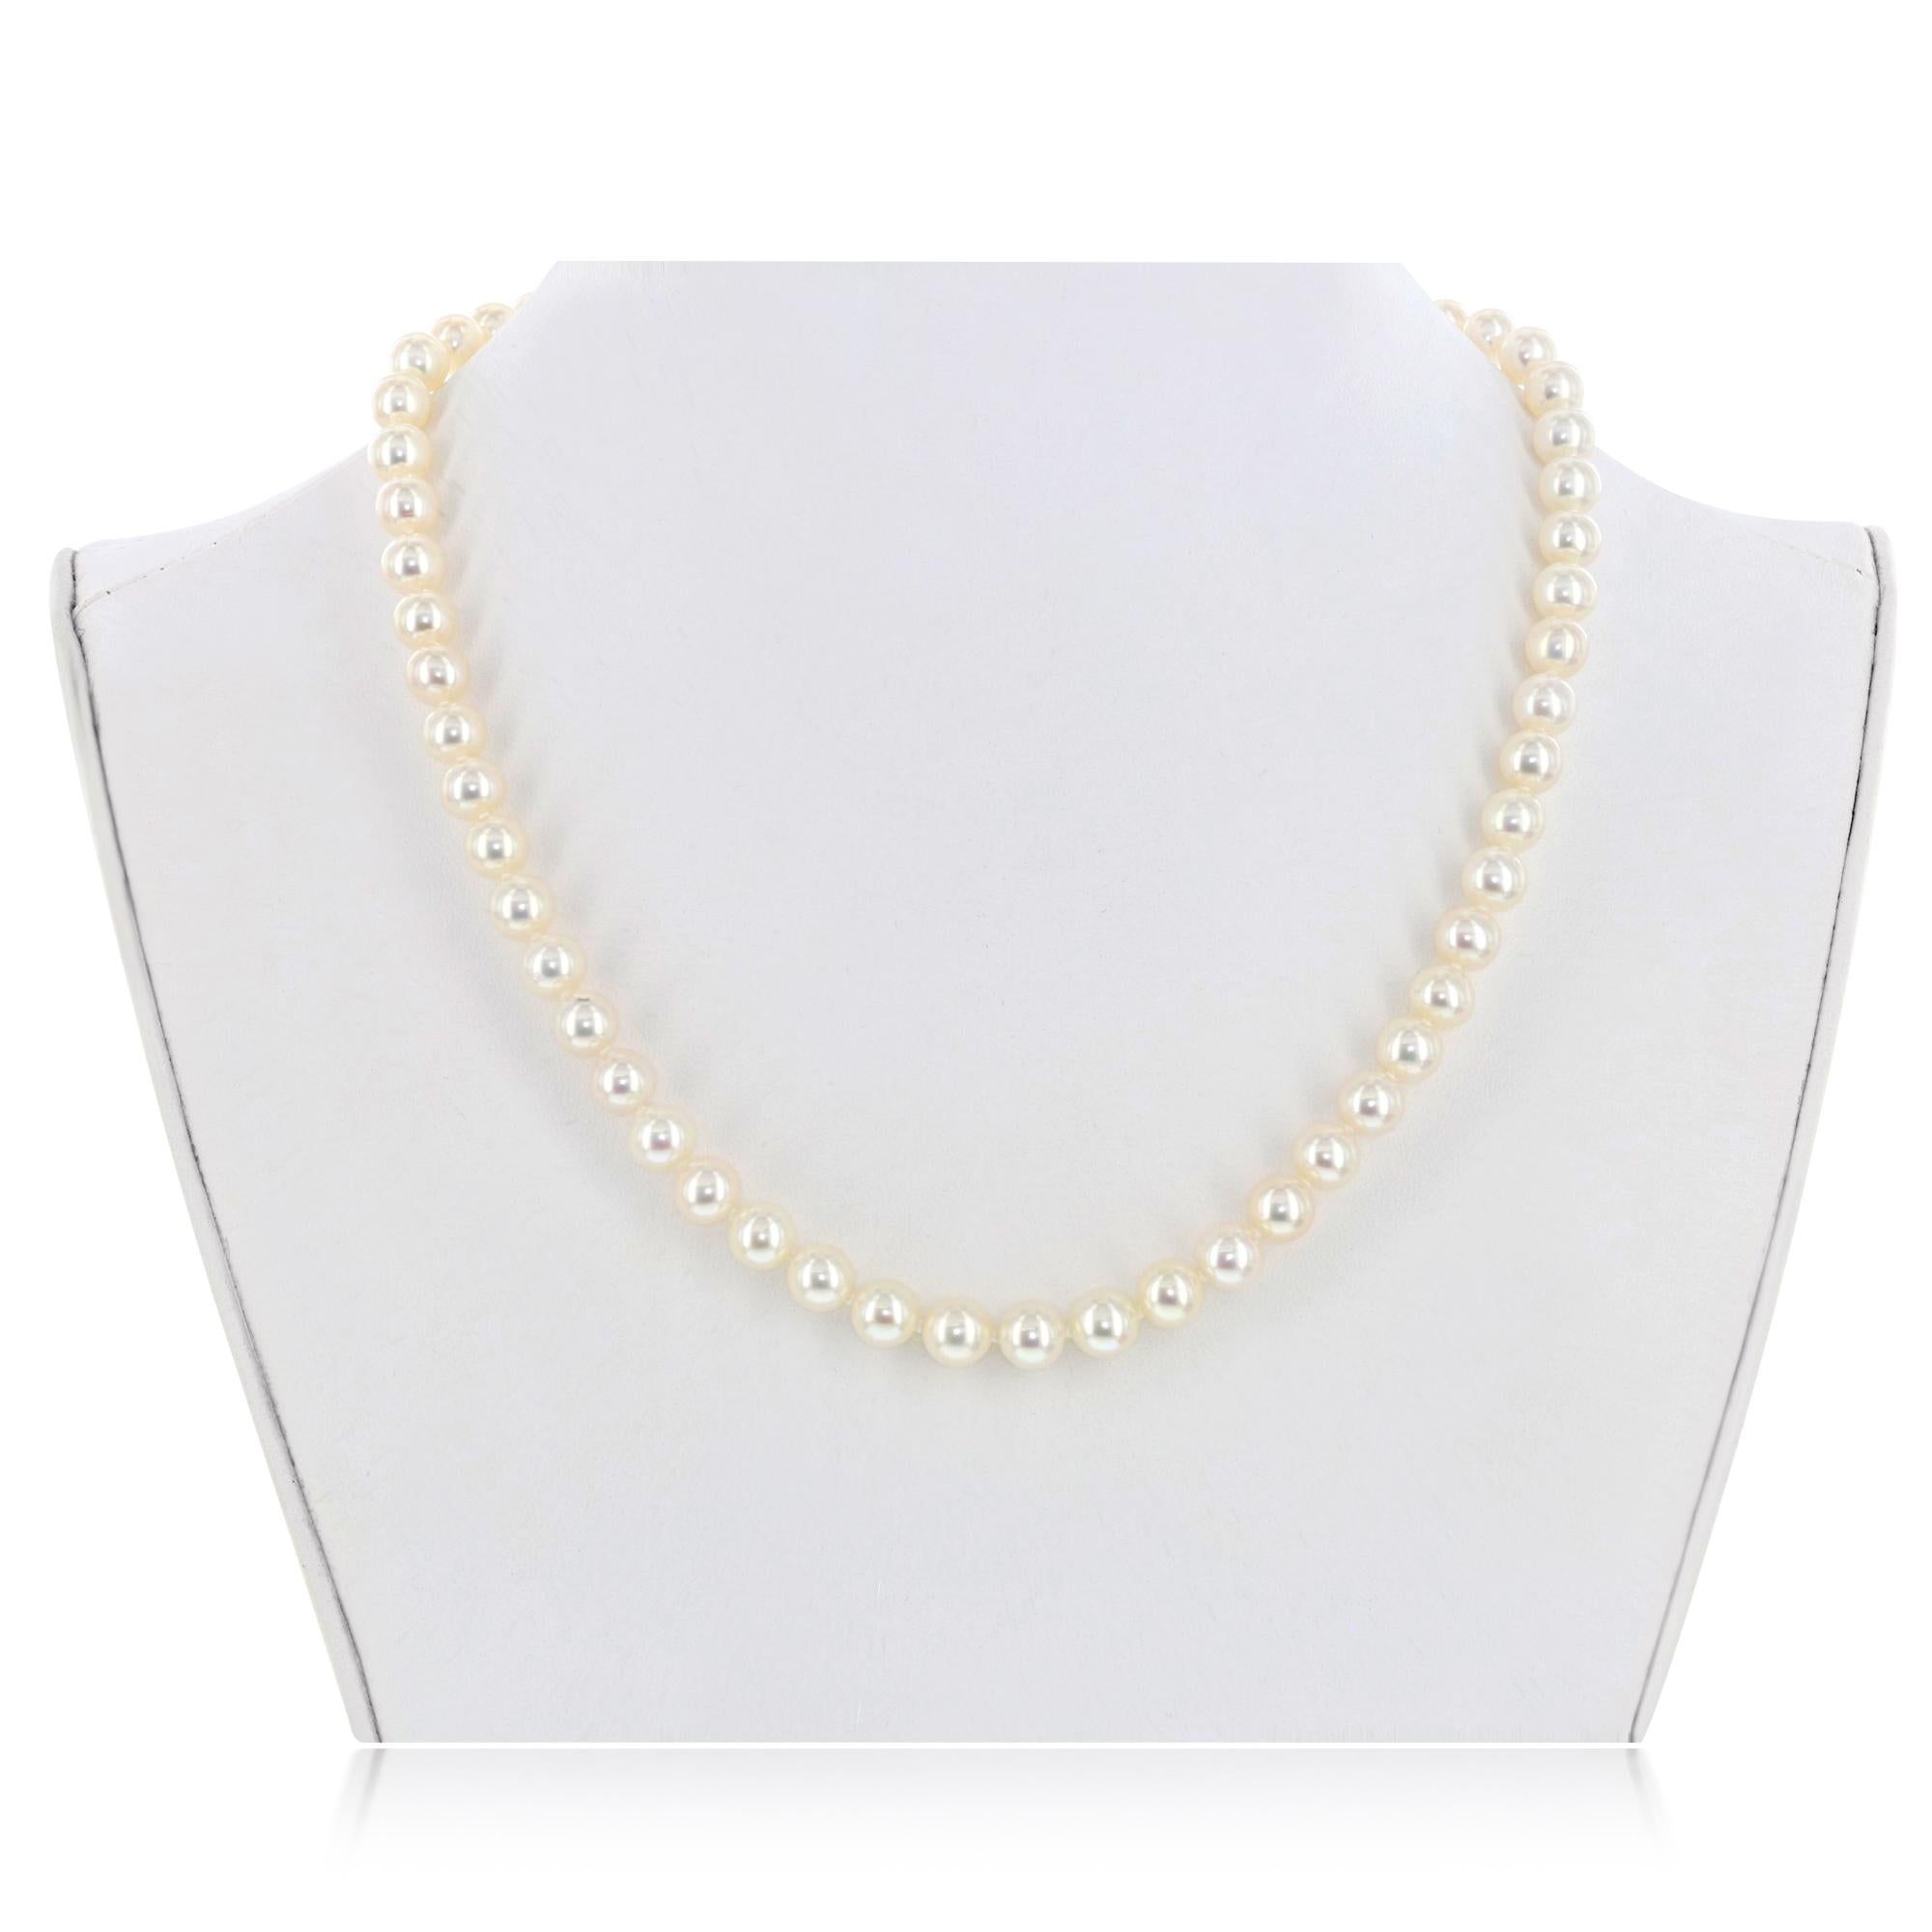 This classic Chinese Freshwater Cultured pearl necklace measures 8-8.5mm and is the perfect addition to any jewelry collection. 
The necklace is strung to 18 inches with a 14 karat yelllow gold filigree clasp.

Pearls are a timeless classic, and